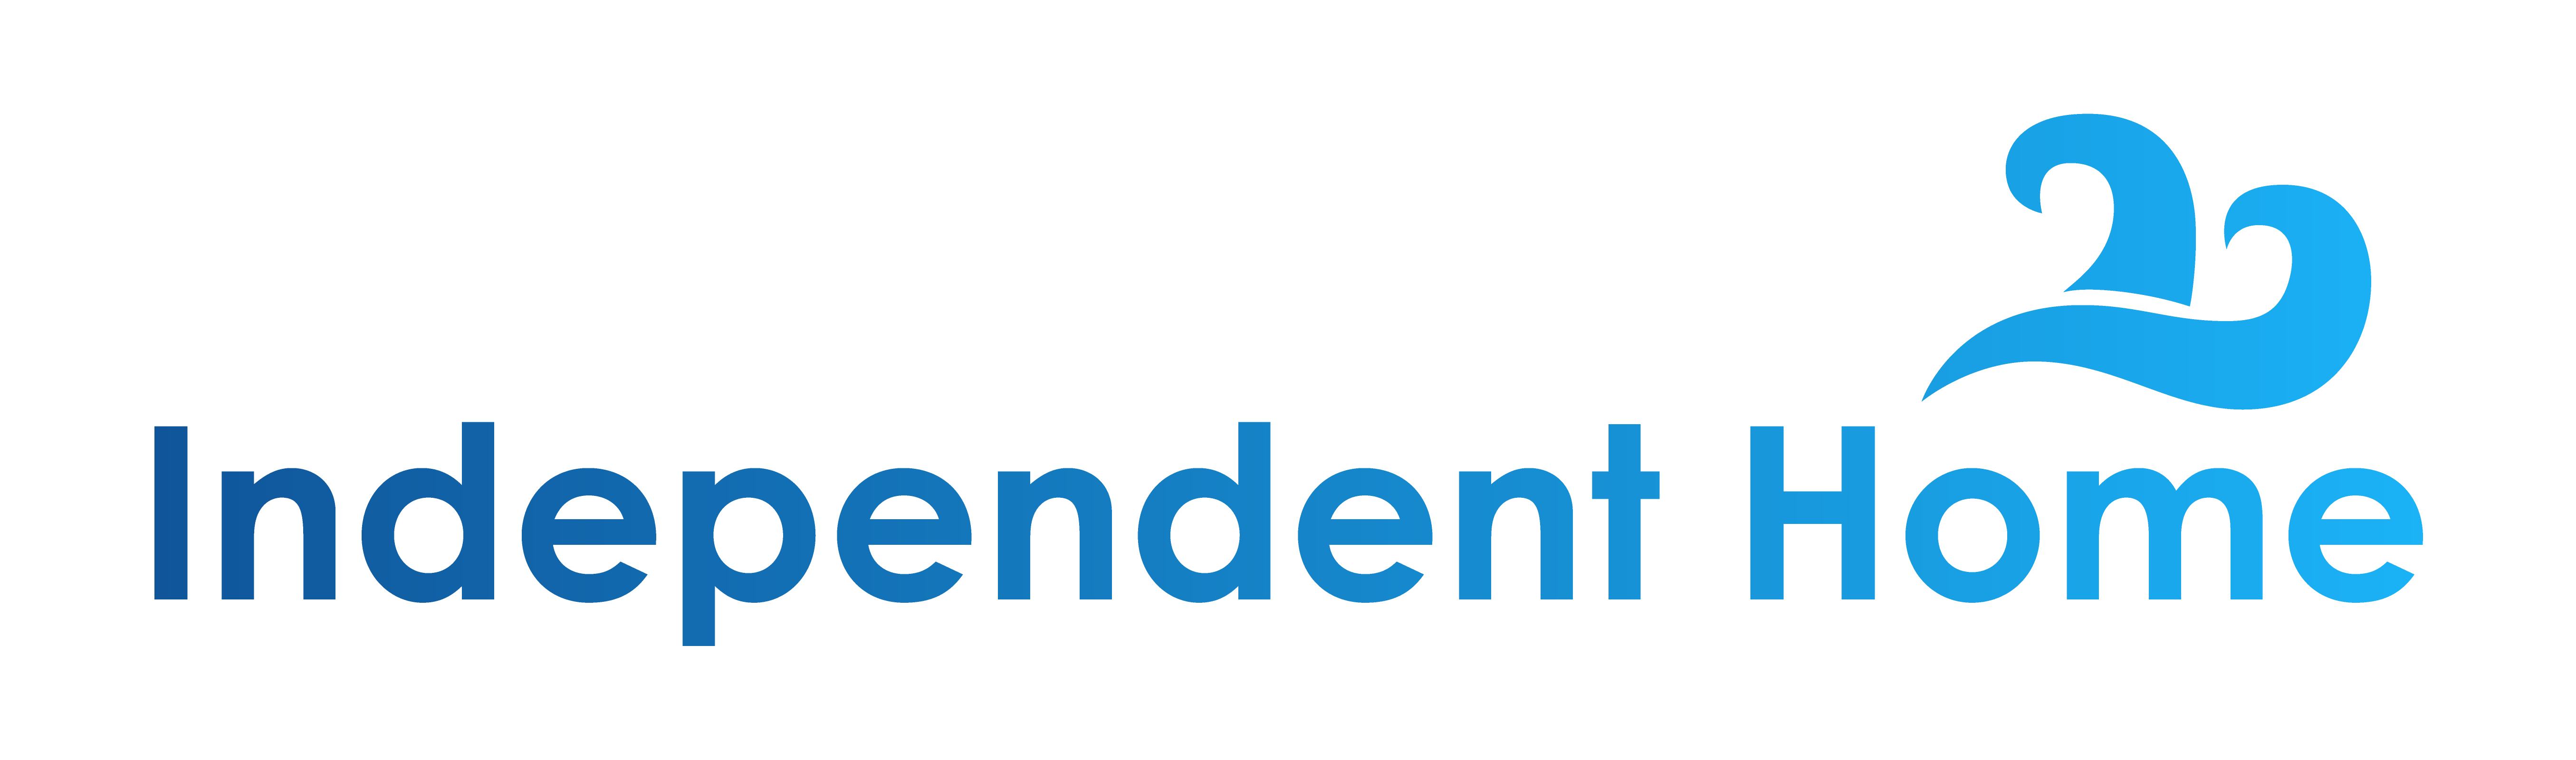 Independent Home - Walk-in Tubs Logo